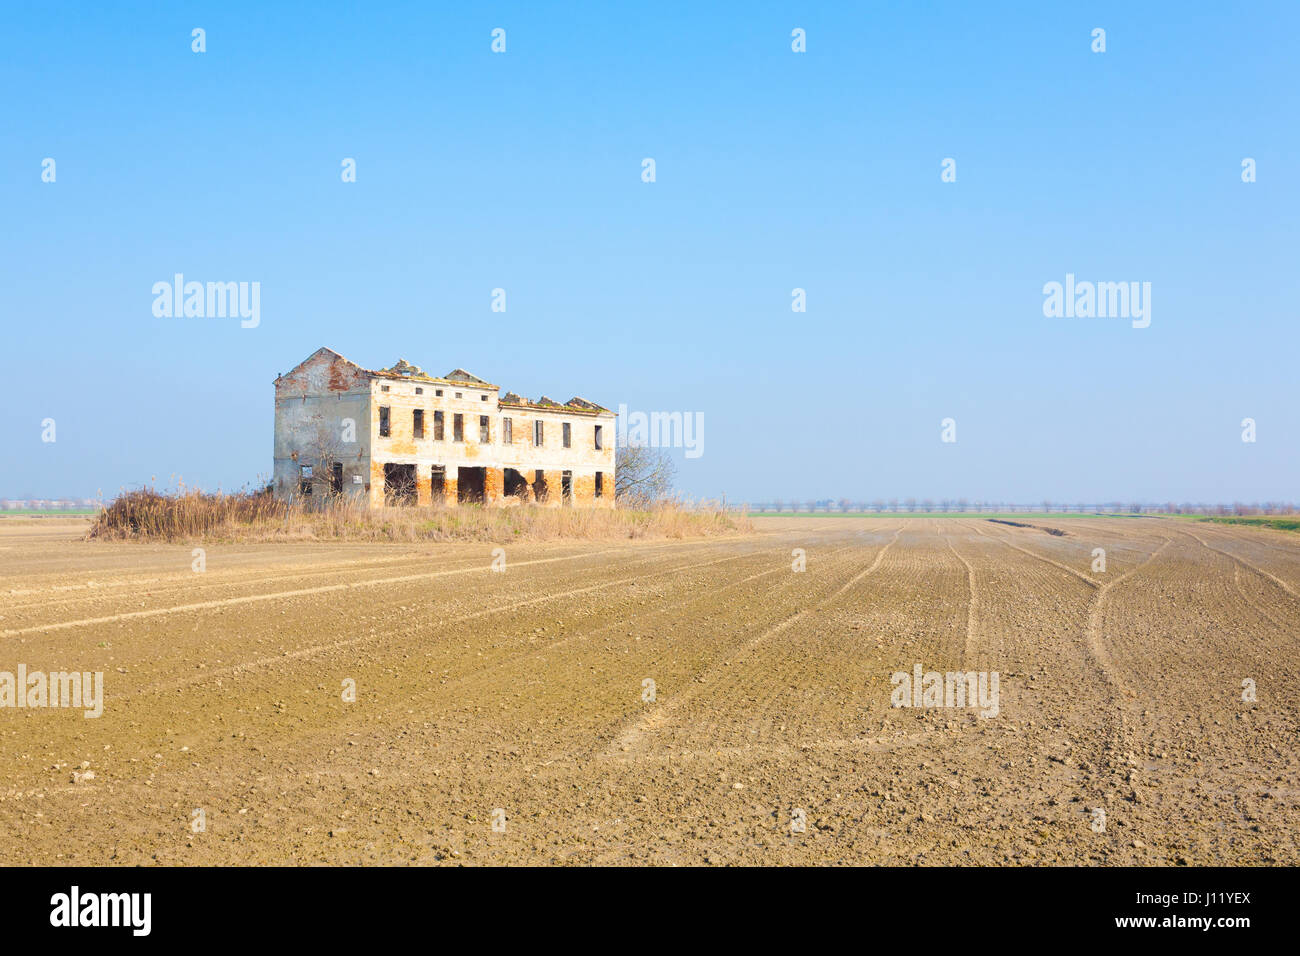 Rural Italian landscape from Po river lagoon.Plowed fields with perspective lines. Abandoned warehouse Stock Photo